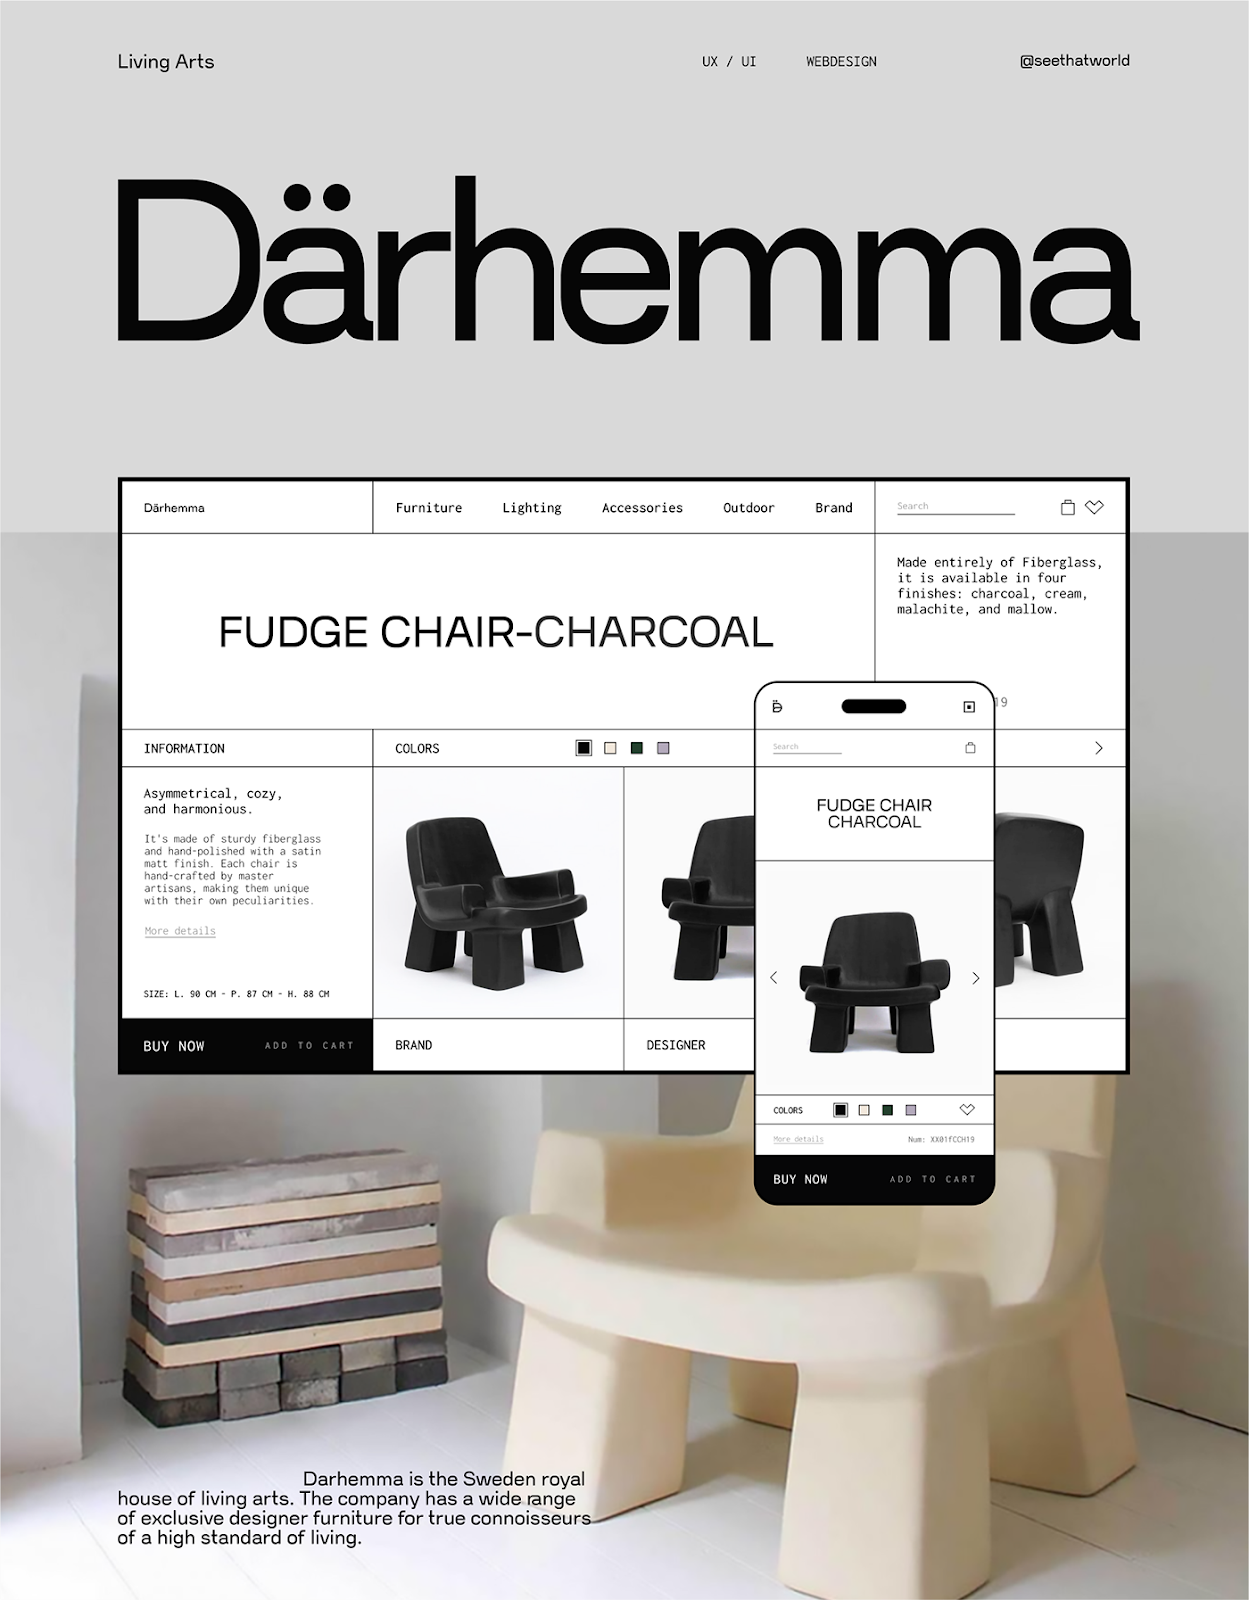 Darhemma is the Sweden royal house of living arts. The company has a wide range of exclusive design.